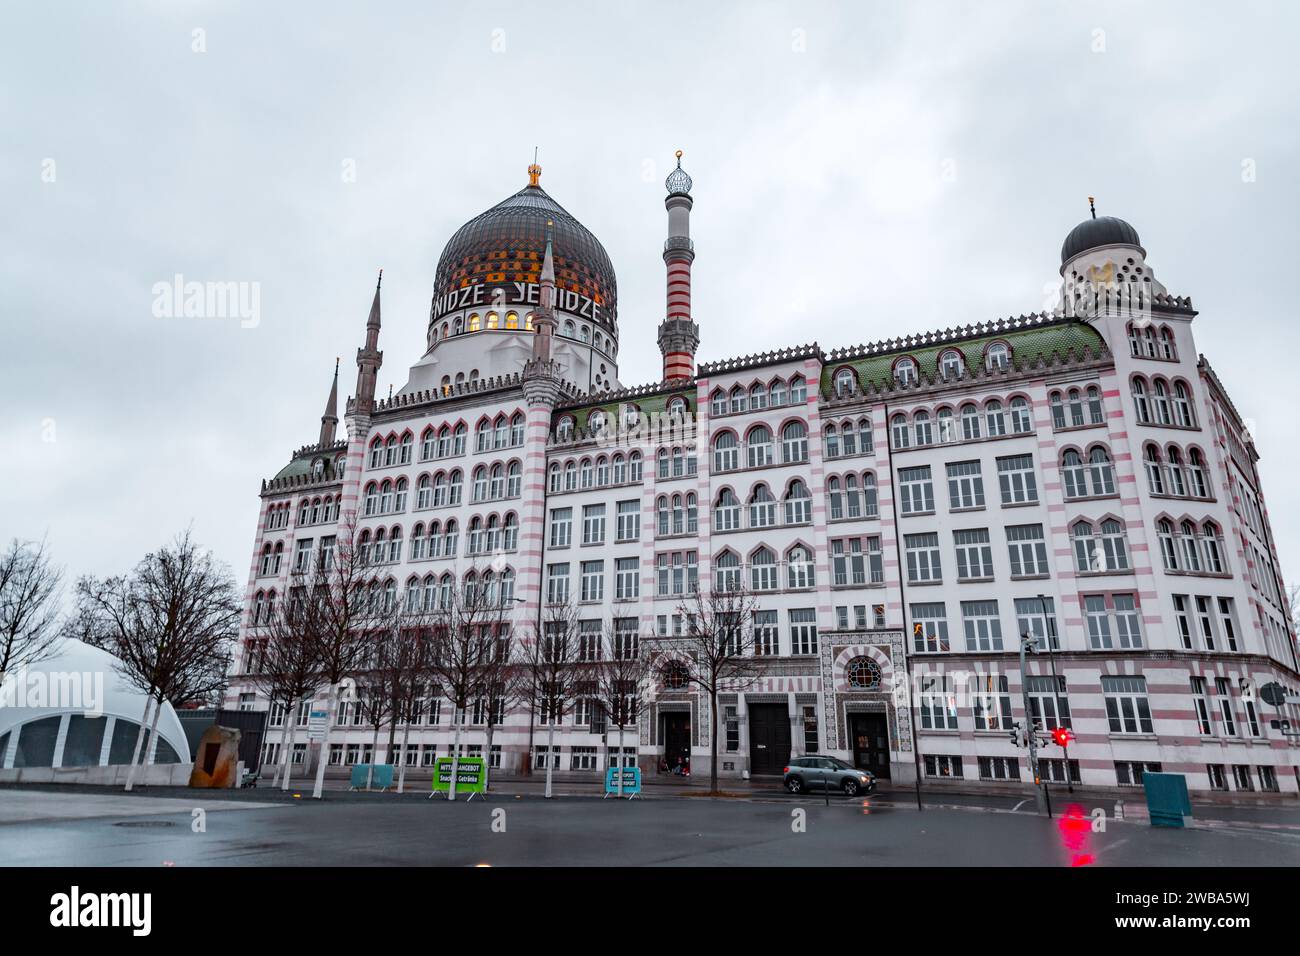 Dresden, Germany - DEC 19, 2021: Yenidze is a former cigarette factory building in Dresden, built 1907-1909. Today it is used as an office building no Stock Photo